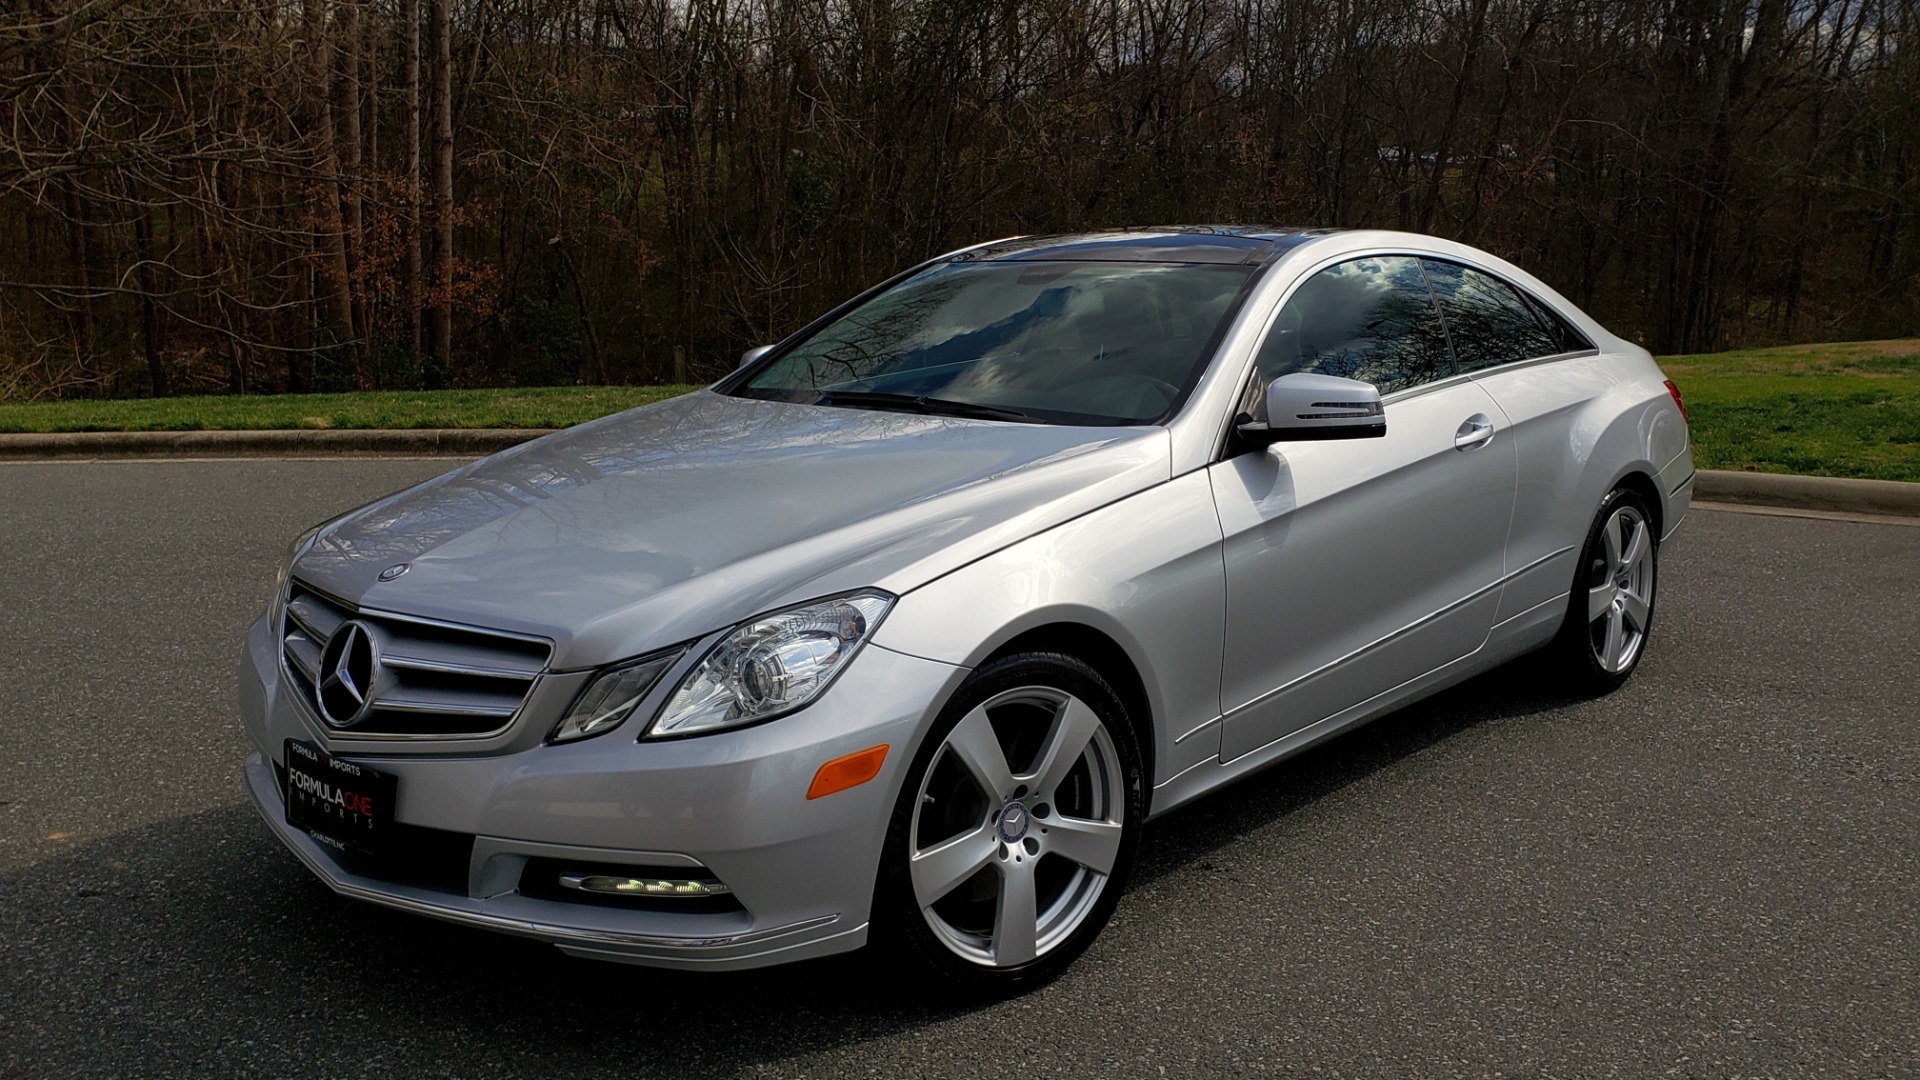 2013 Mercedes Benz E350 Coupe AMG Sport Review And Test, 57% OFF